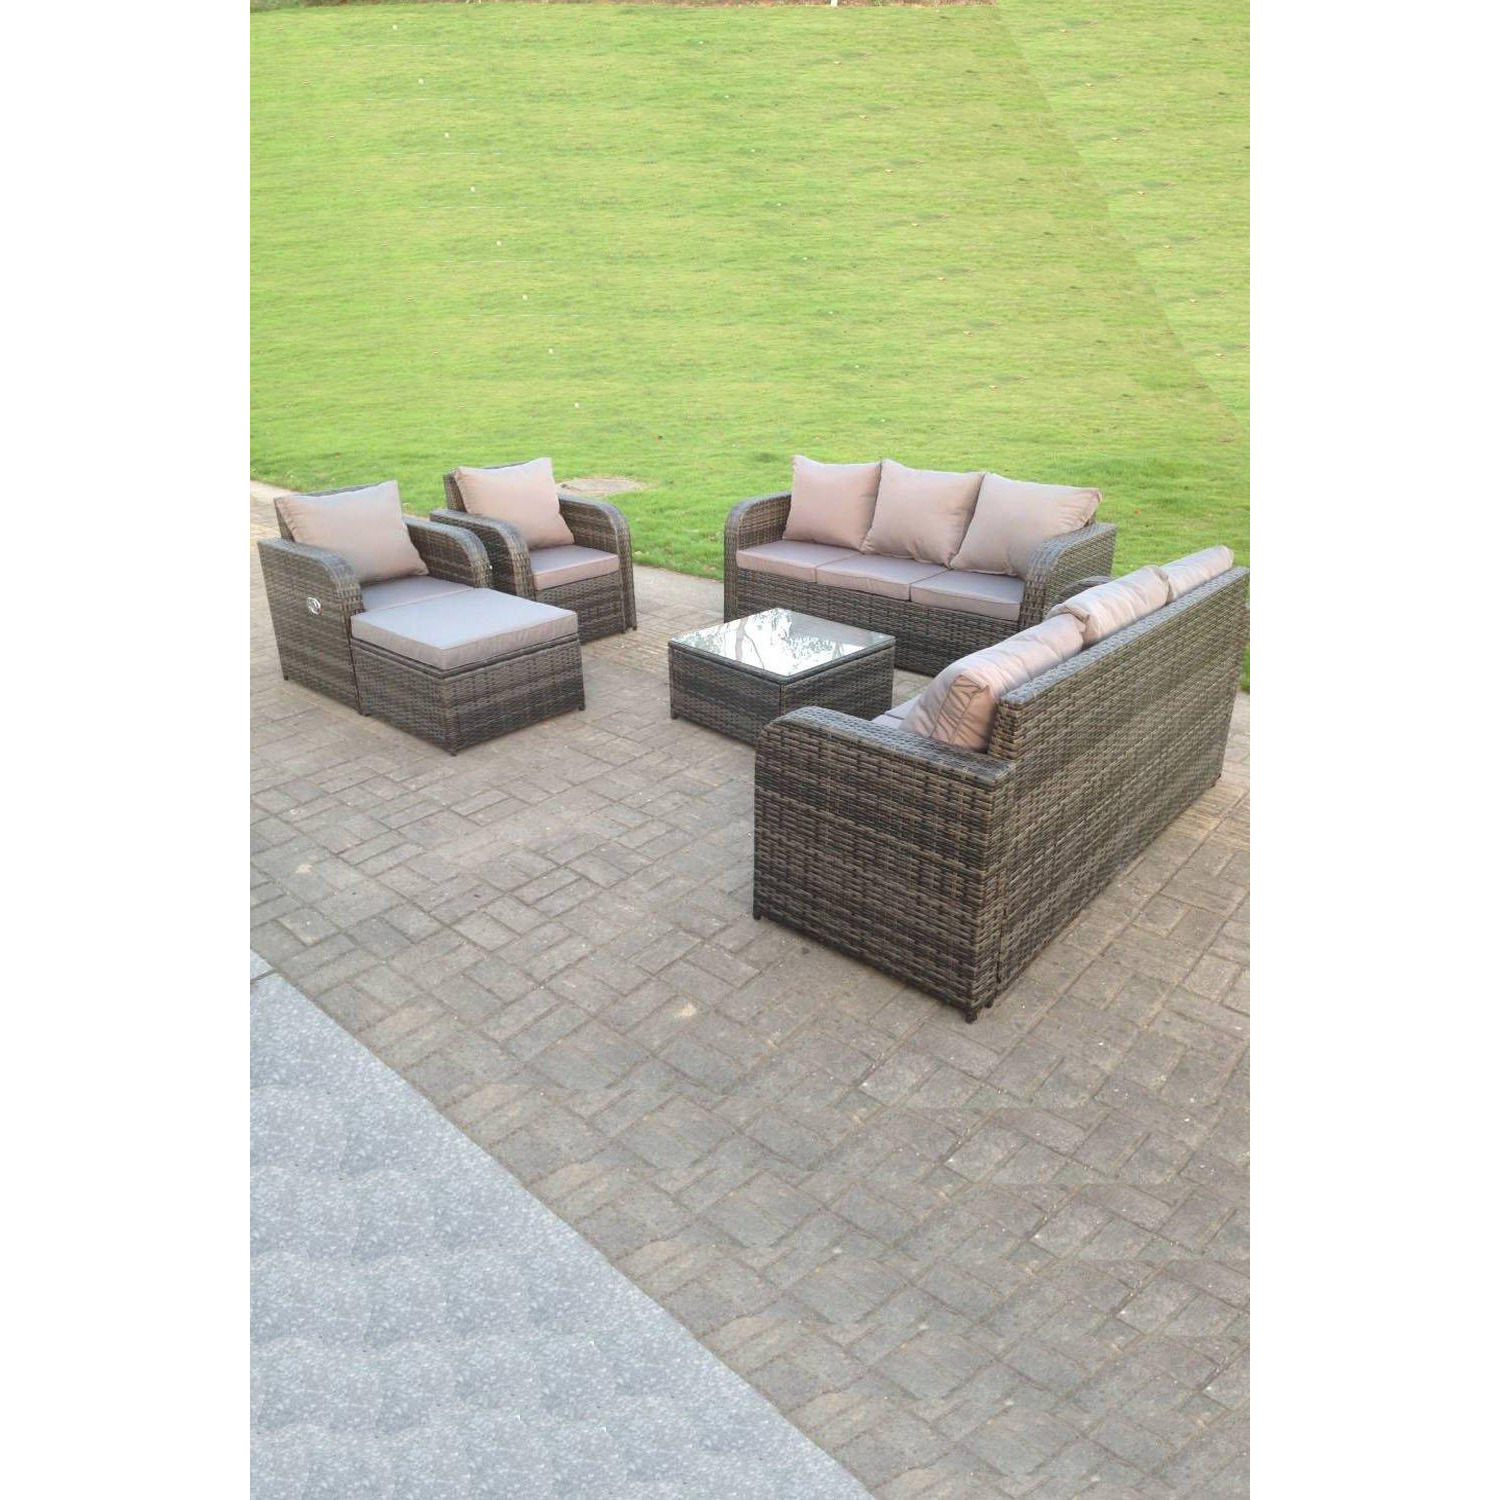 Wicker Garden Furniture Set Lounge Sofa Reclining Chair Outdoor Big Footstools  9 Seater - image 1